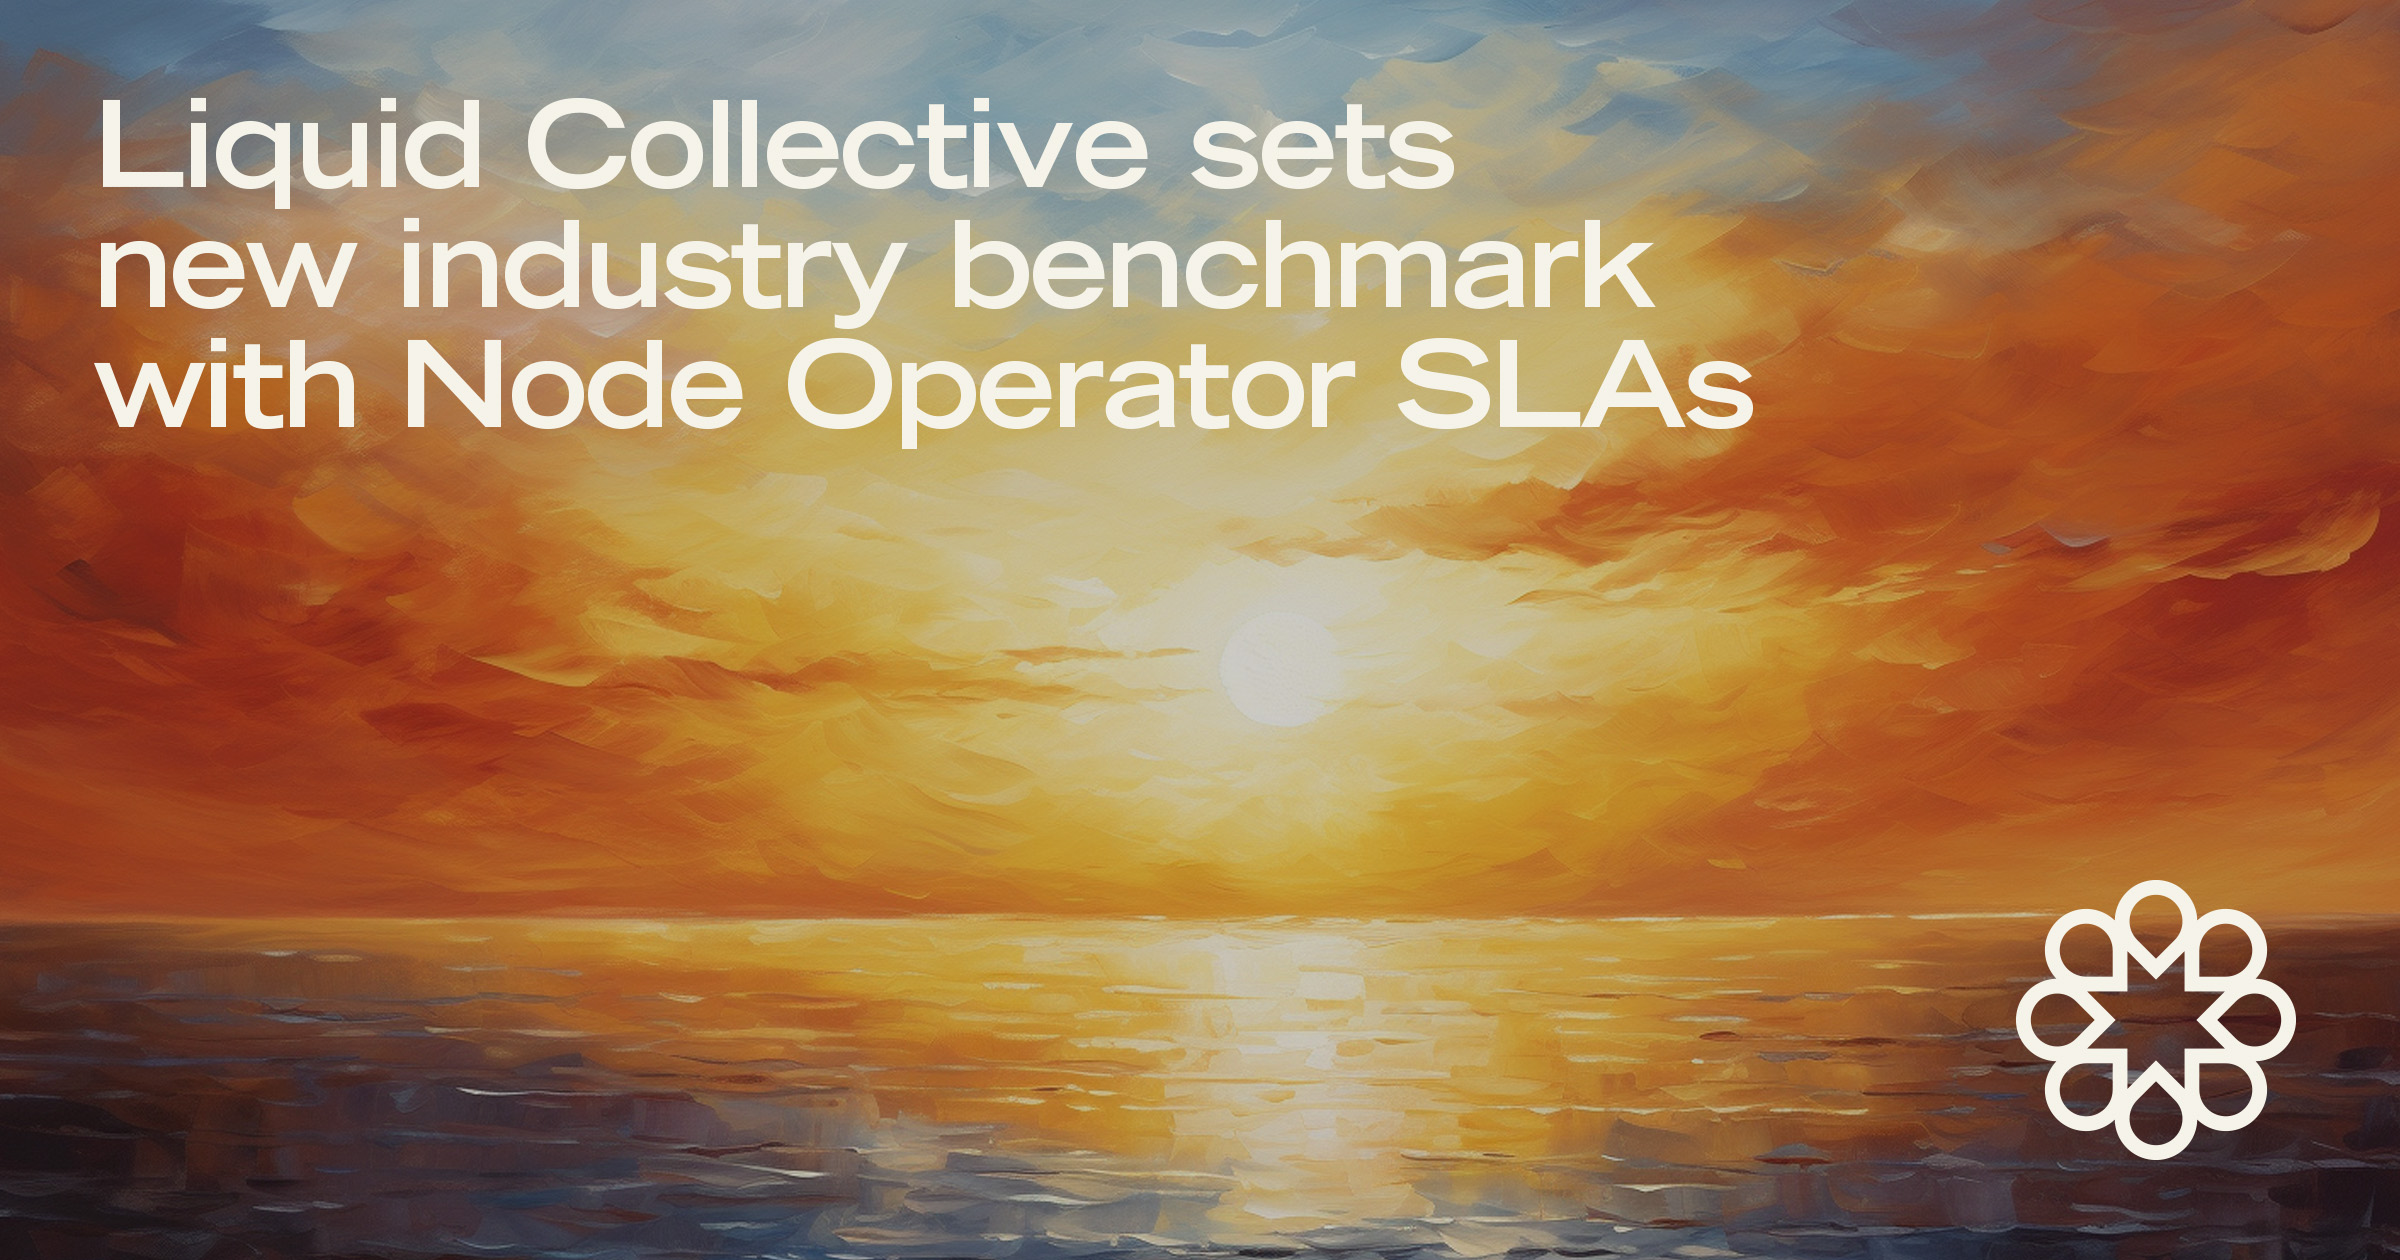 Liquid Collective sets new industry benchmark with Node Operator SLAs